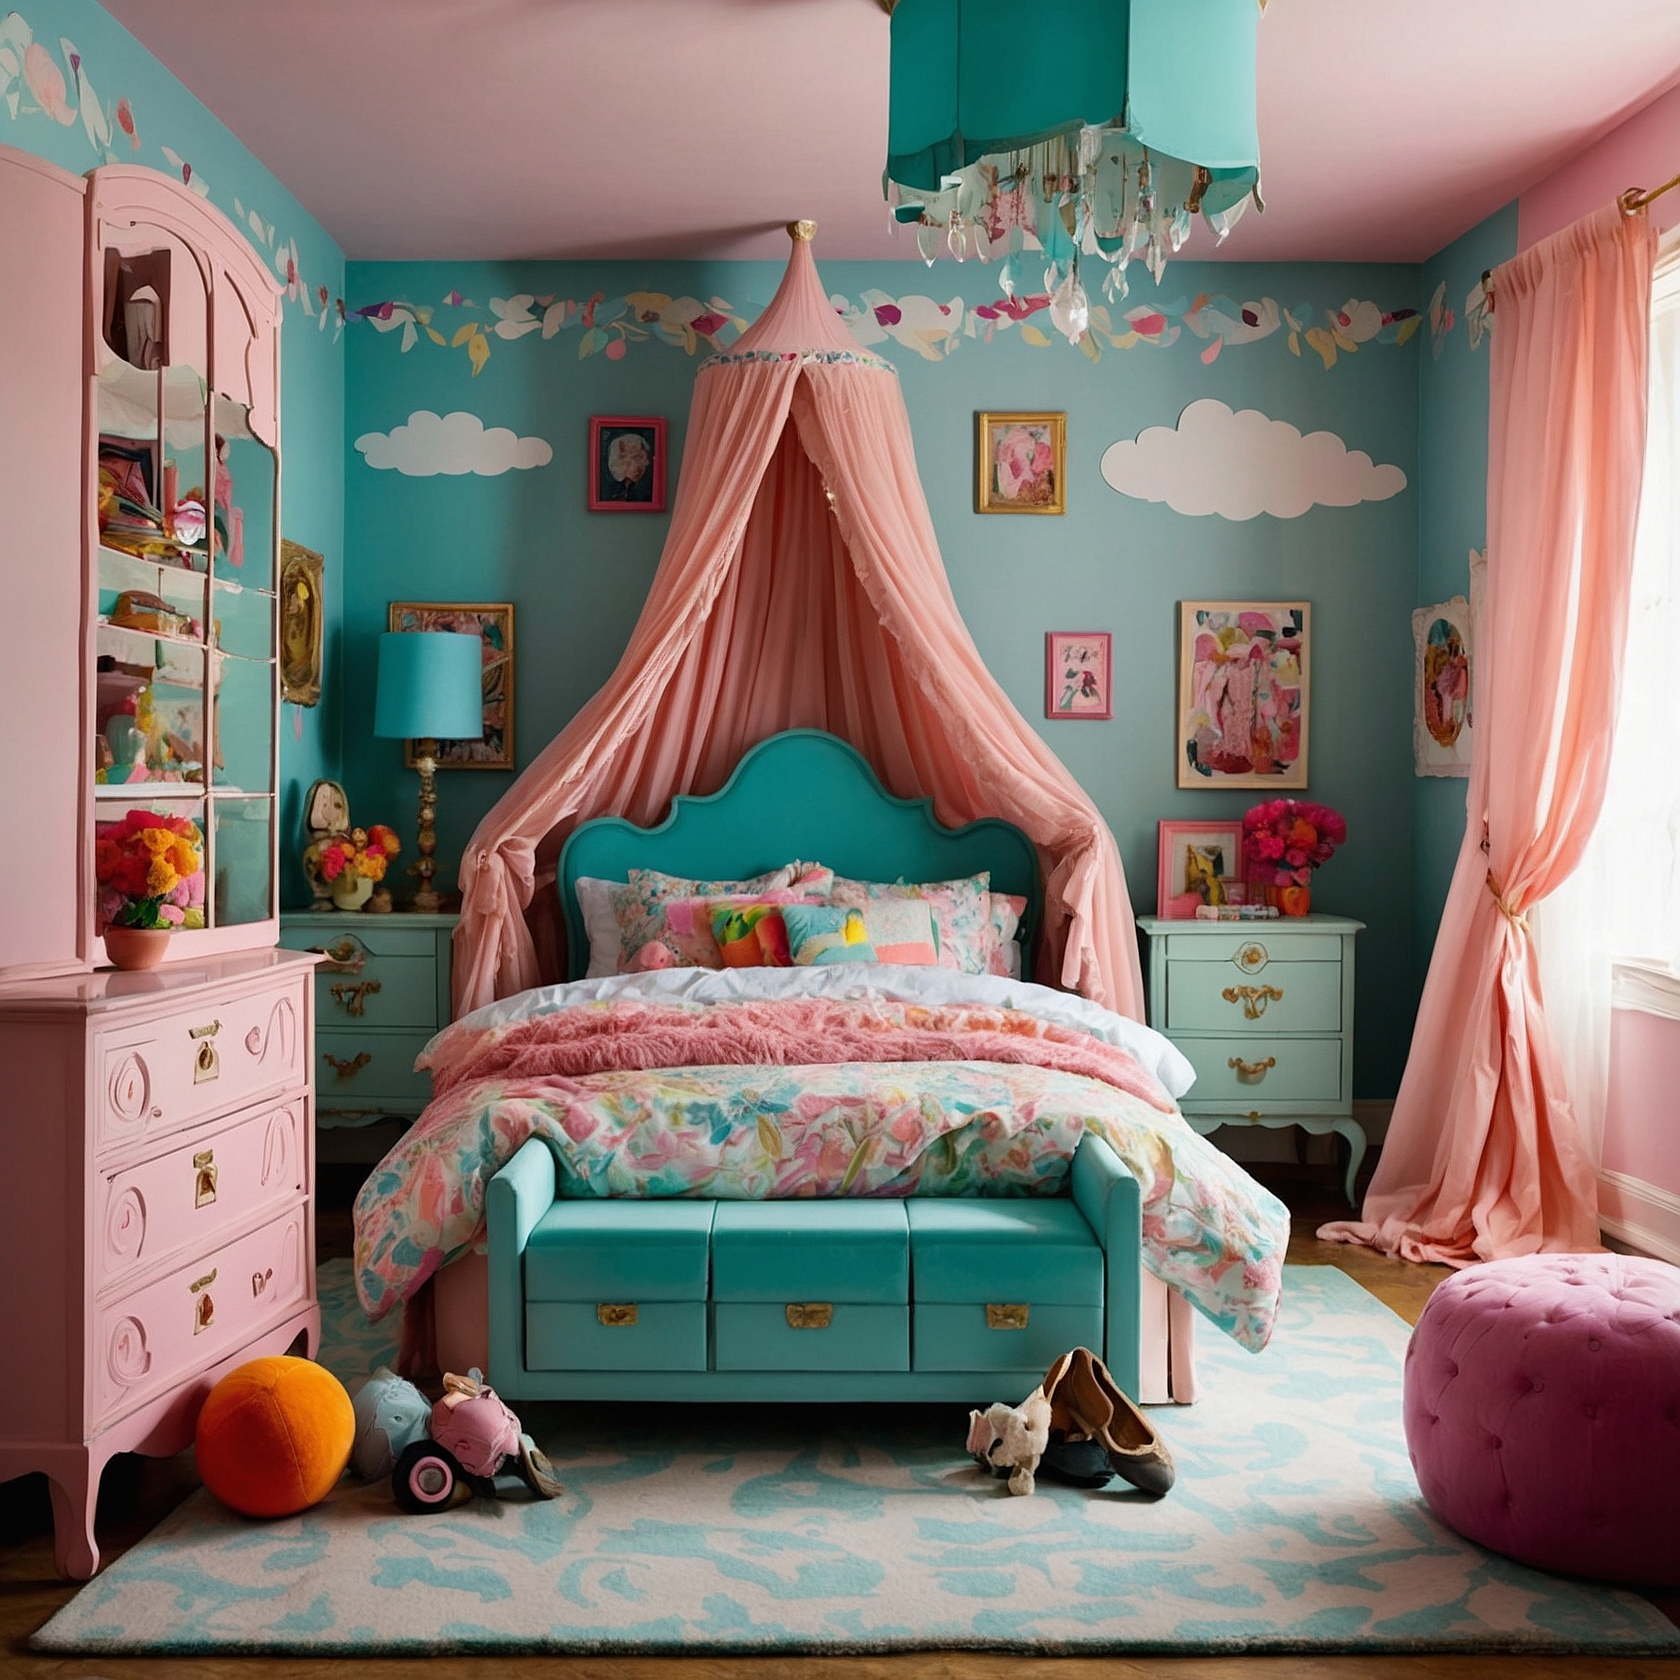 Pink and Blue With Canopy Bed And Sky Mural